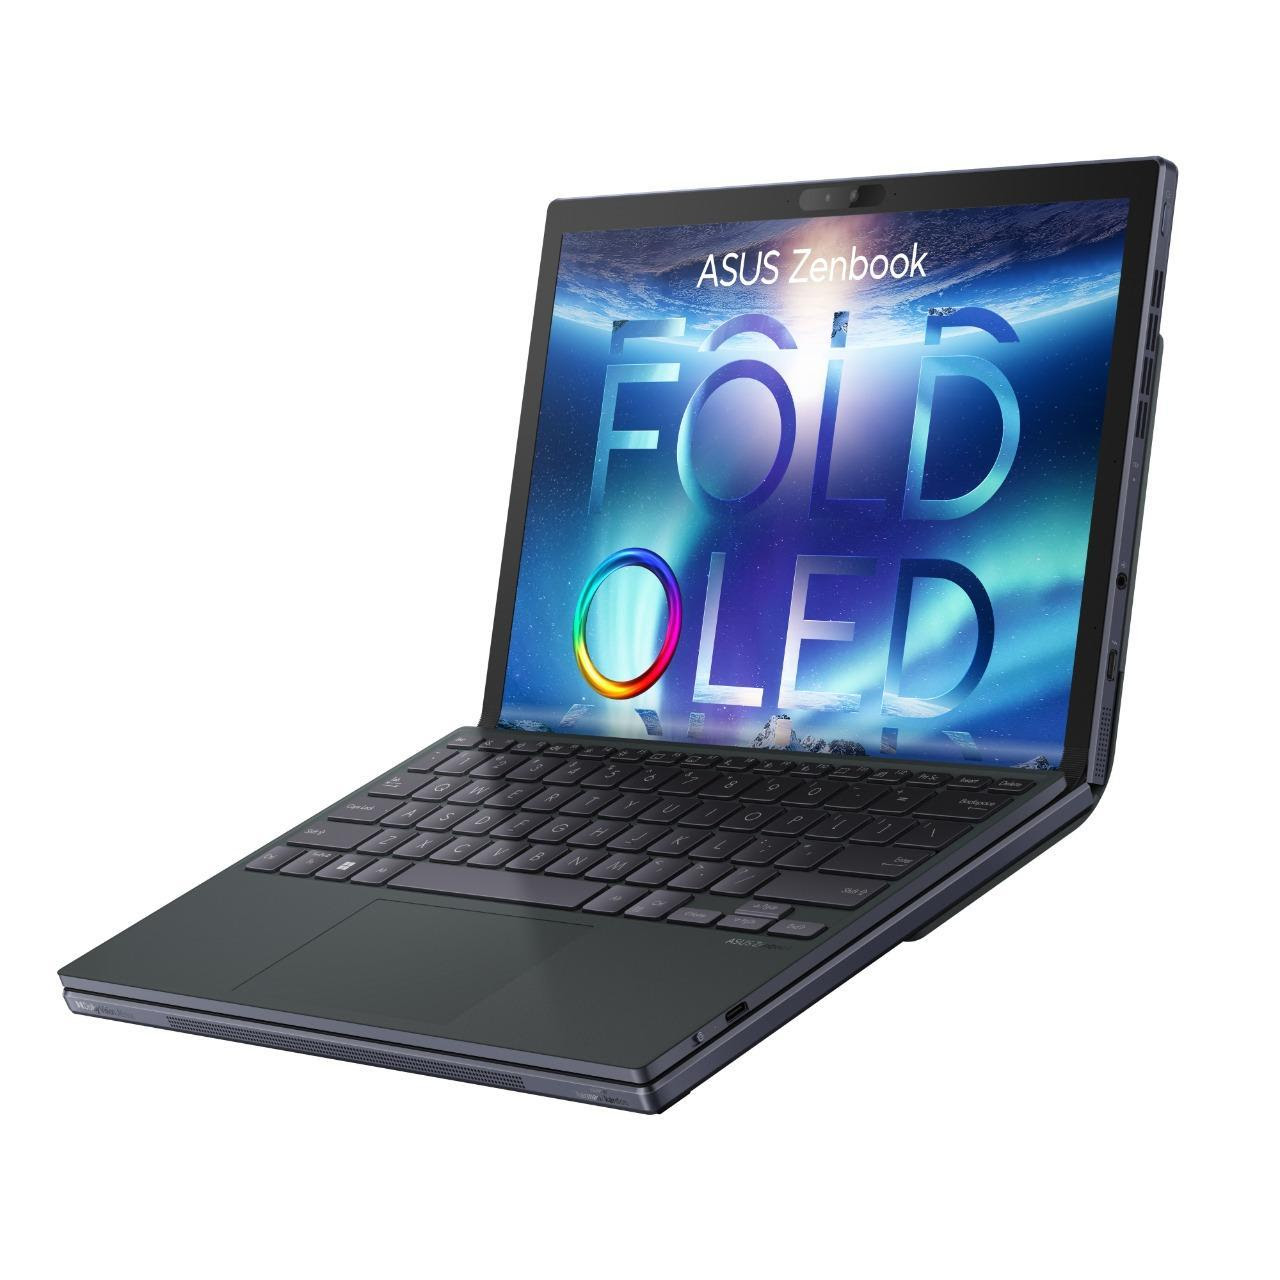 ASUS Announces World's First Folding Notebook at CES 2022! And it's AWESOME